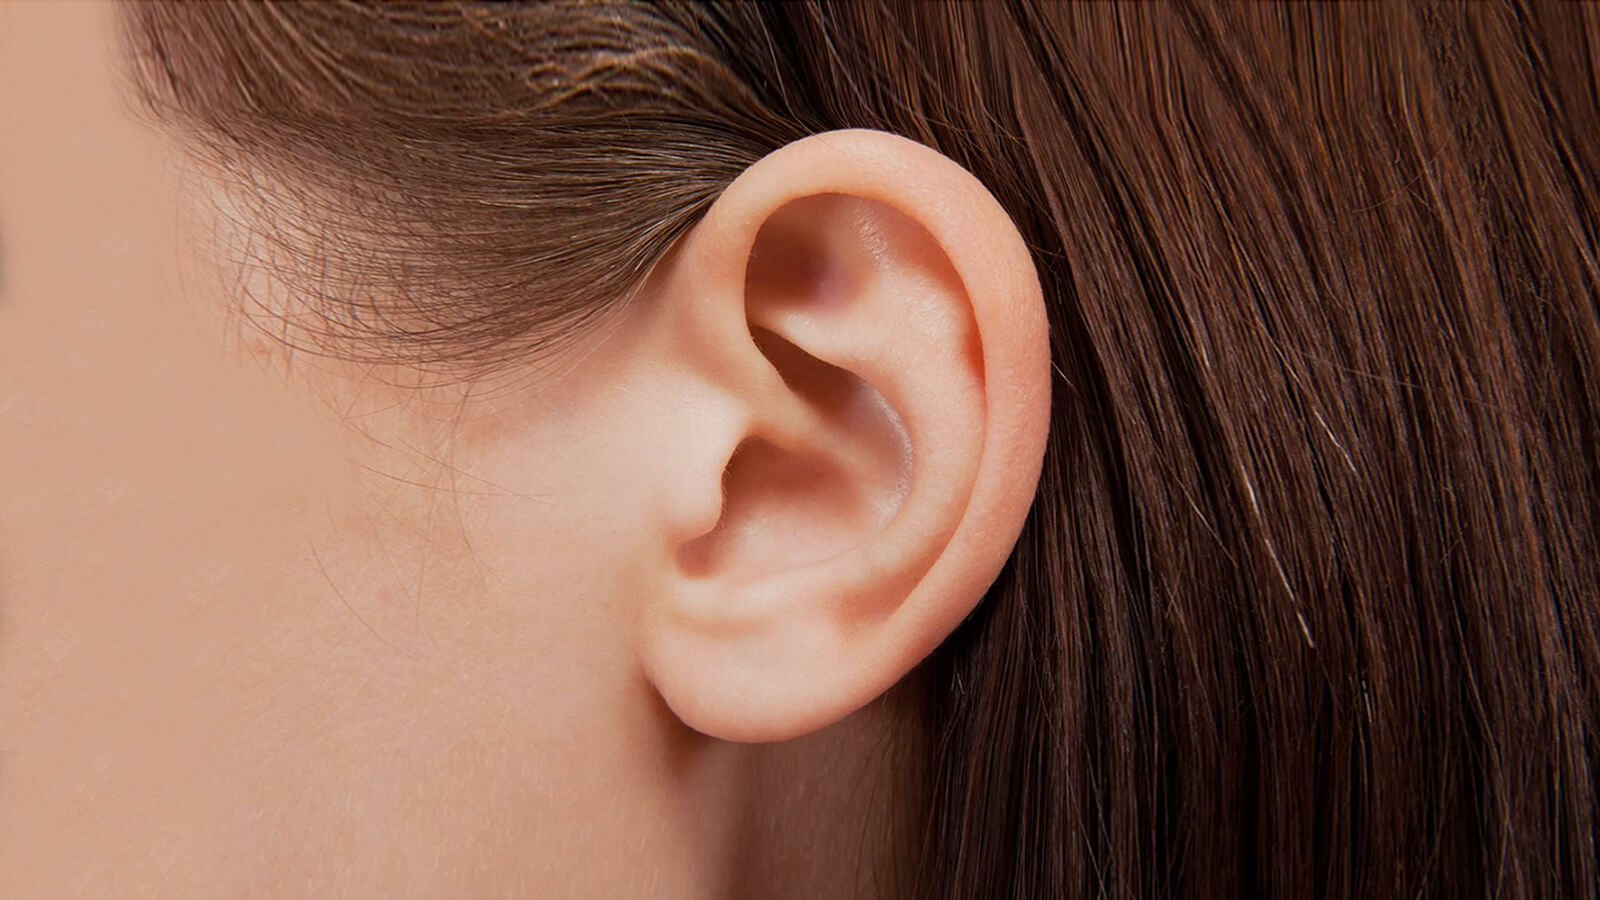 Auriculotherapy 101: Basics of Ear Acupressure Therapy